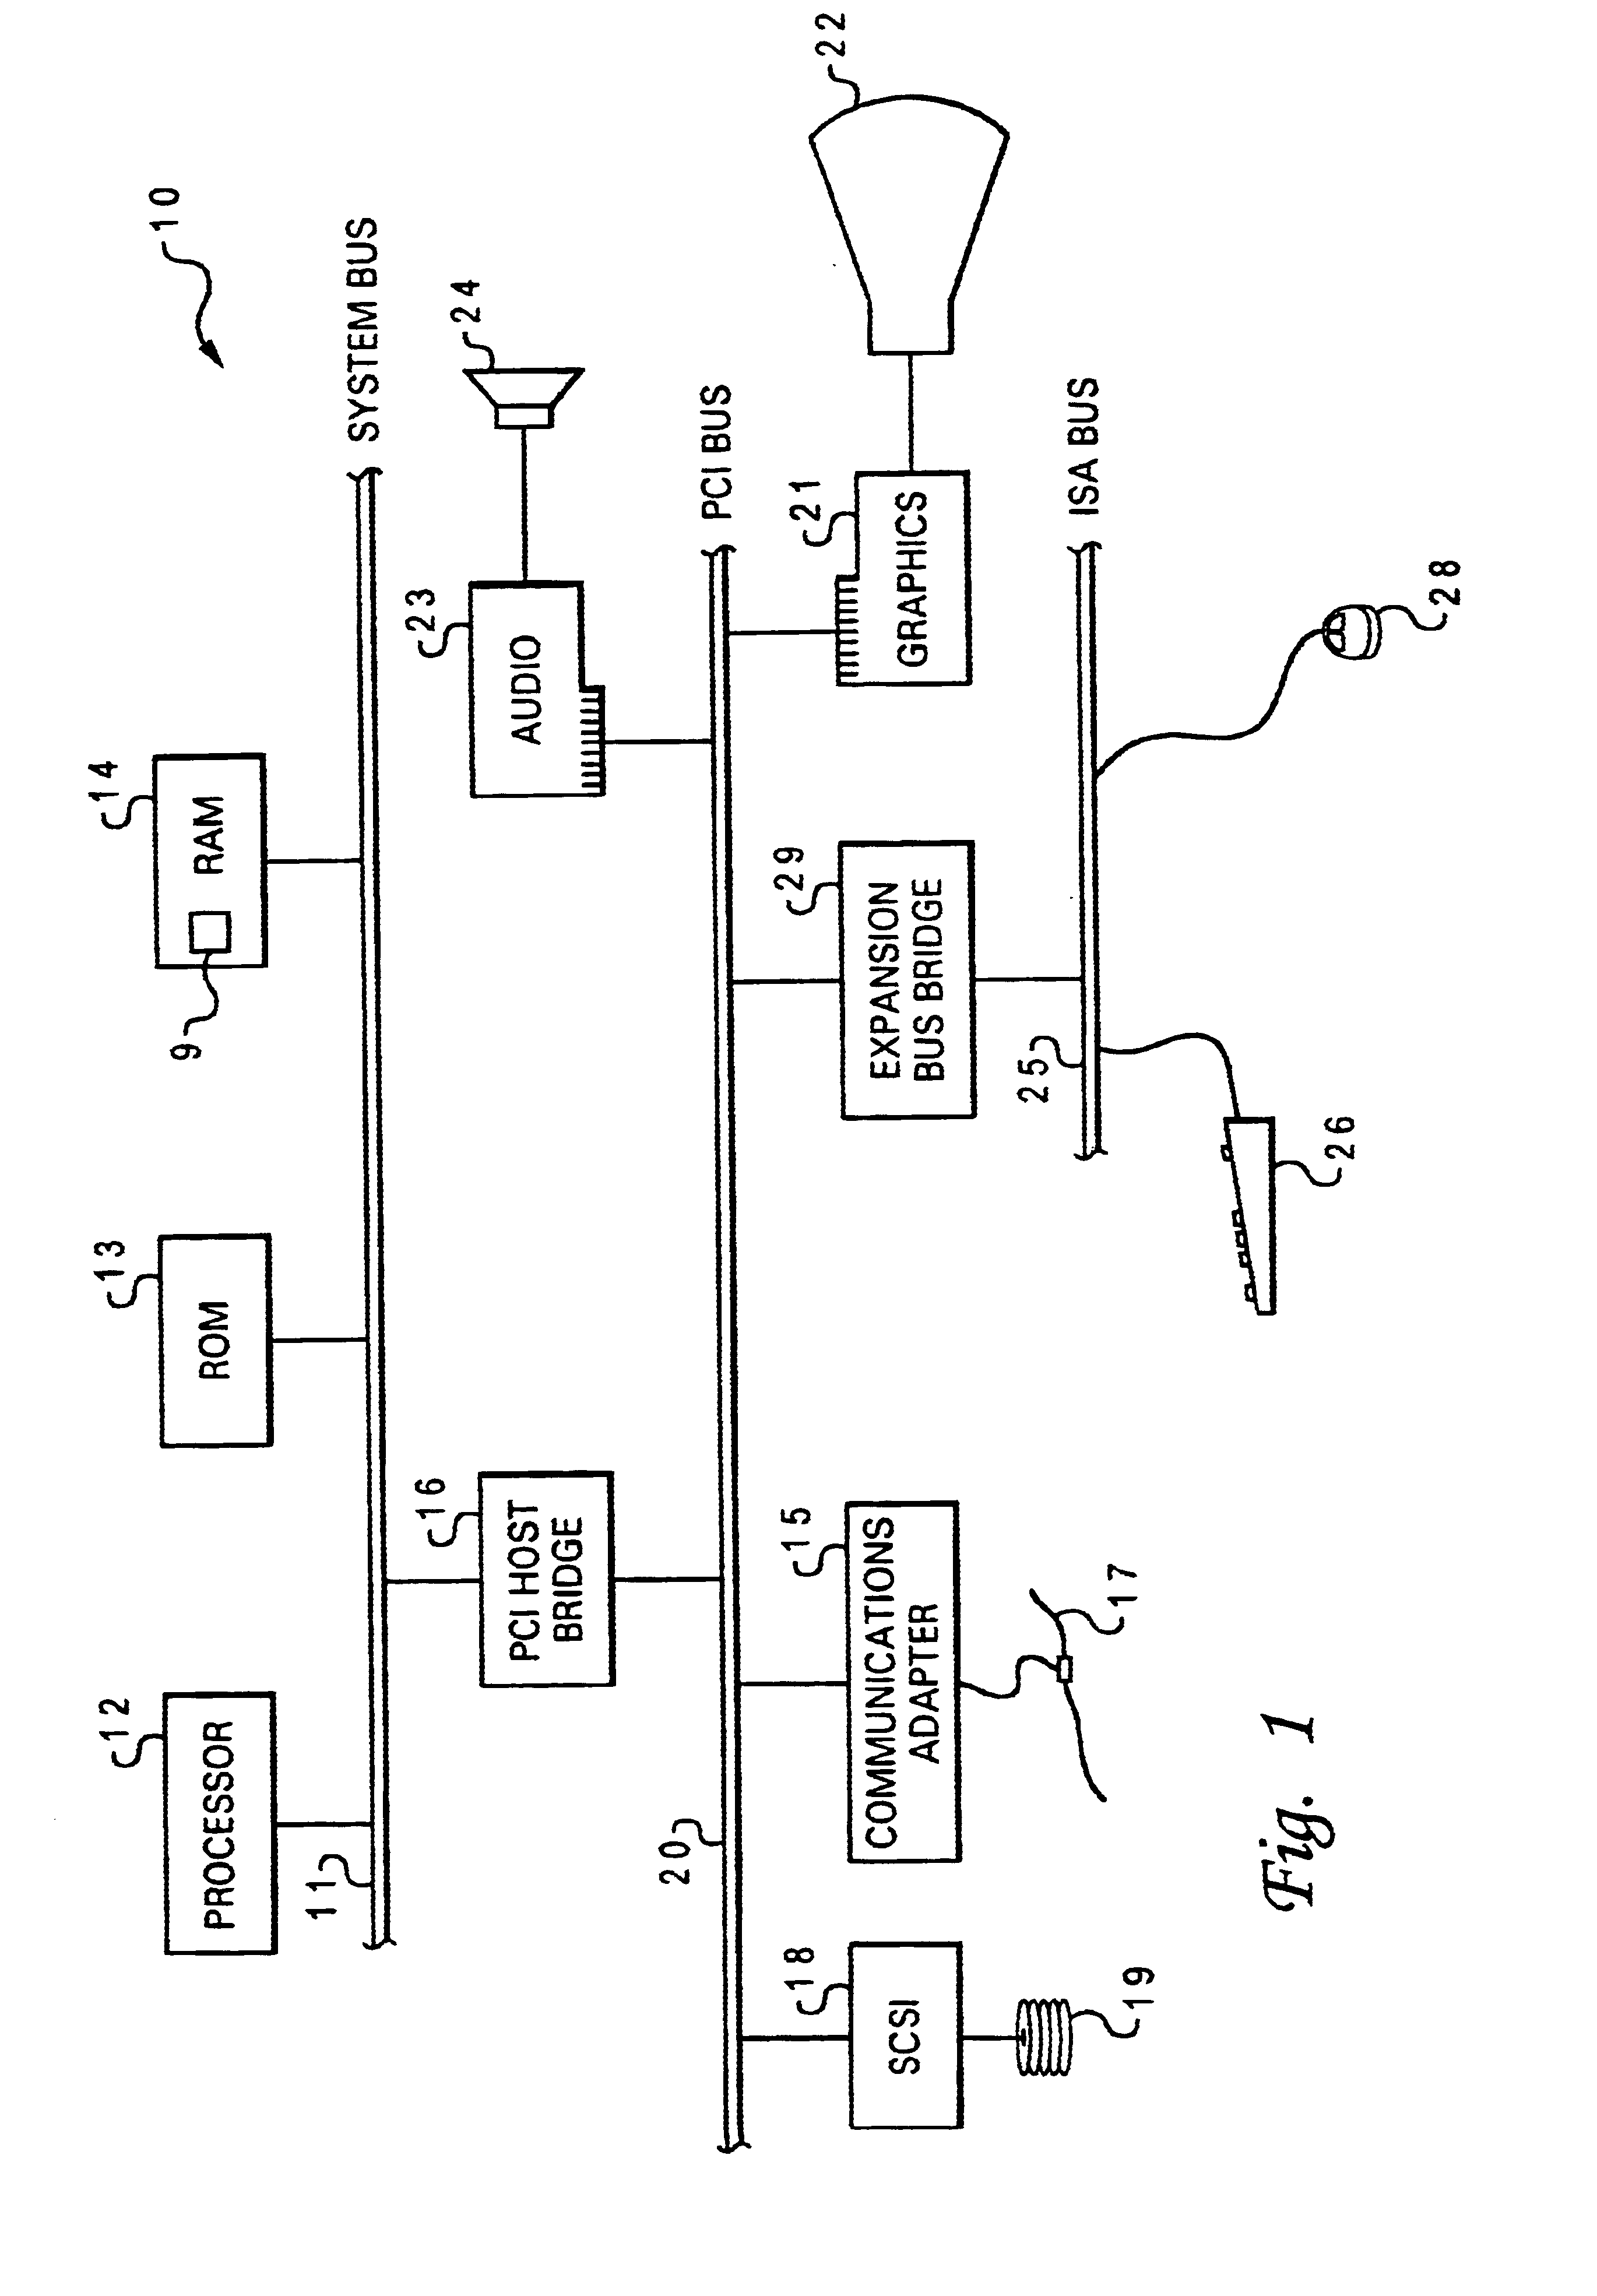 Method, system and program for specifying an electronic food menu with food preferences from a universally accessible database